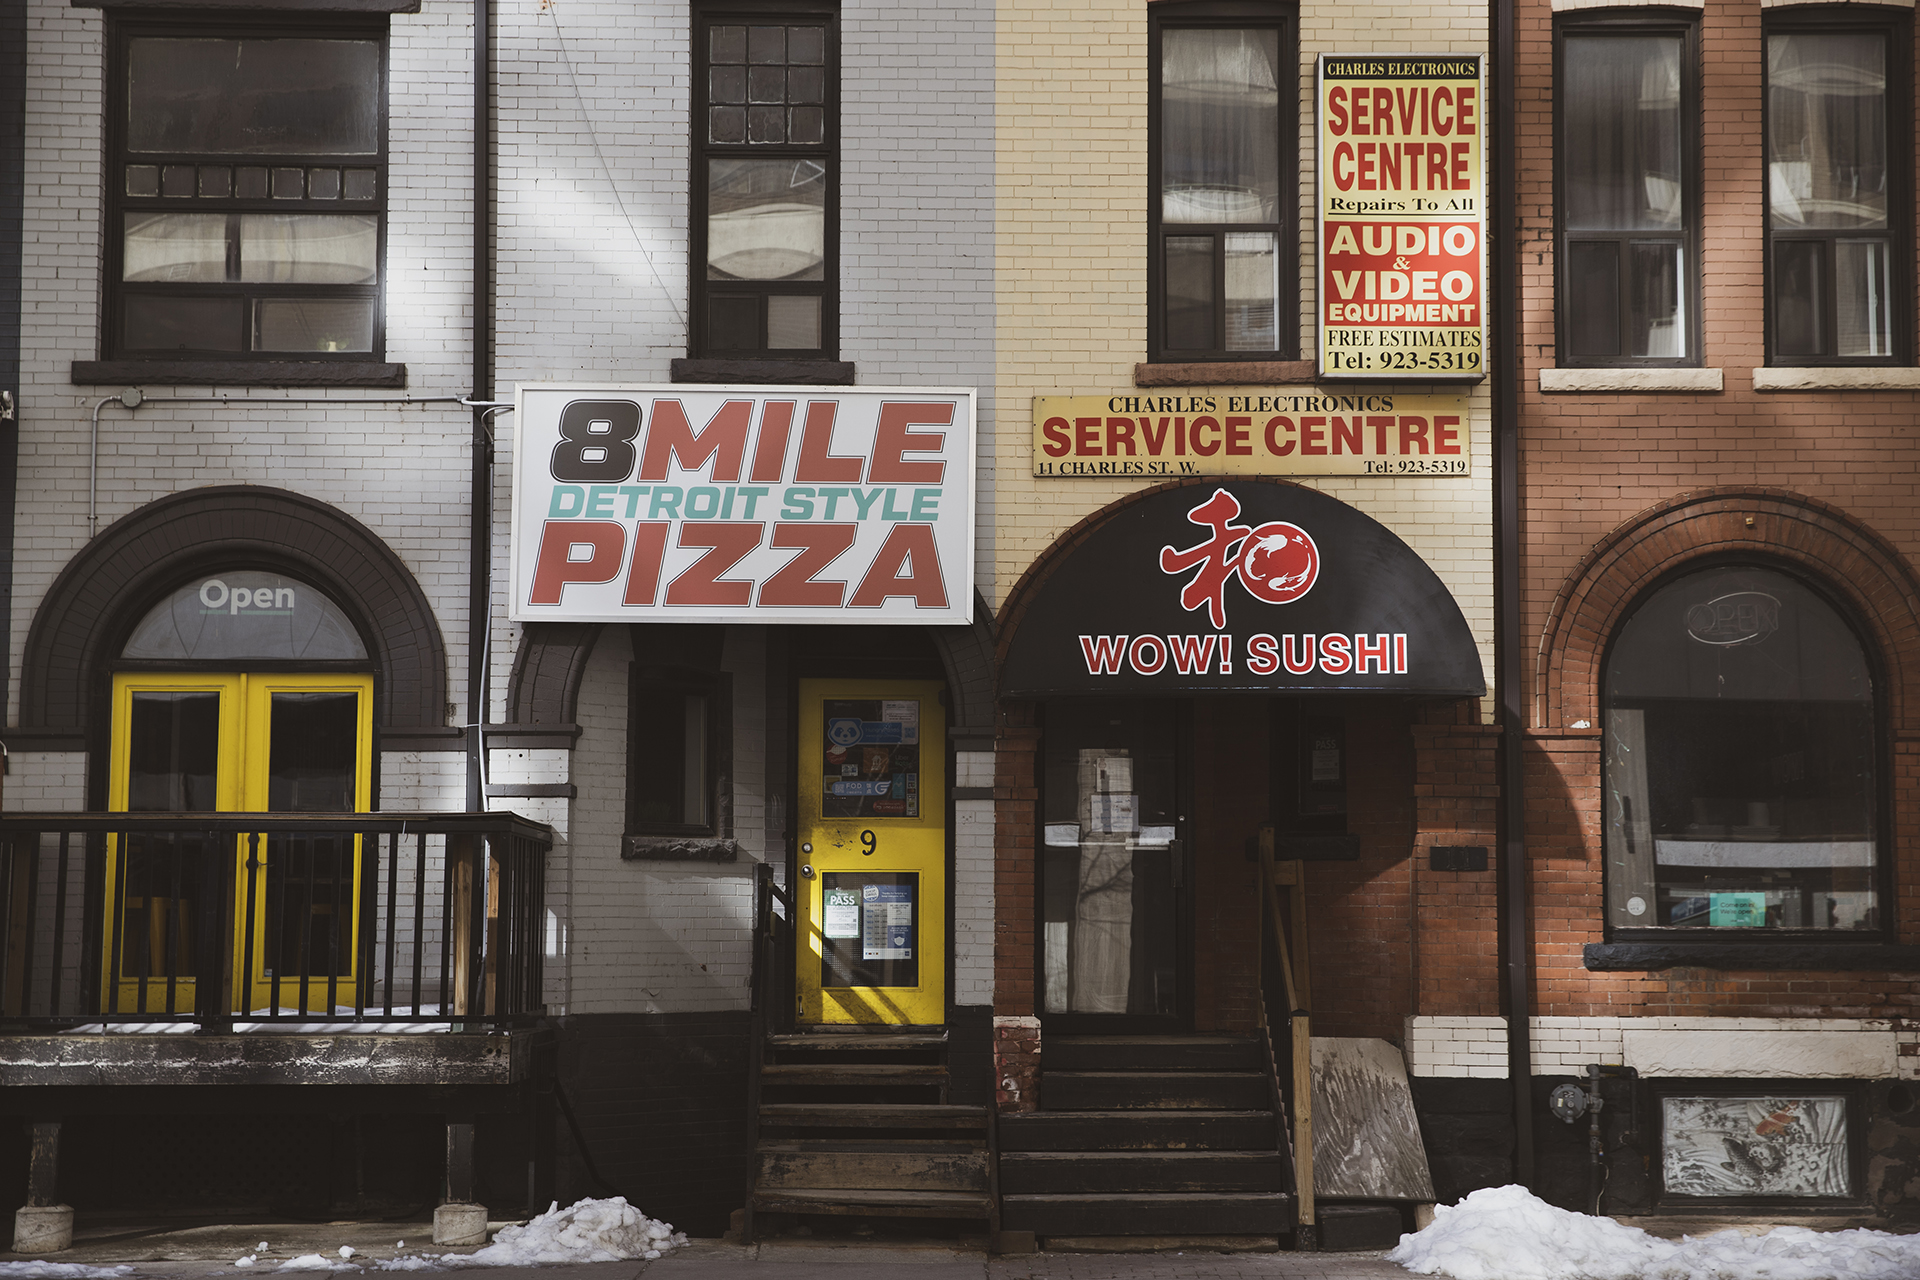 Two businesses side by side: a pizza restaurant and an audio and video equipment store. The pizza business is painted grey with yellow doors, and the equipment store has pale yellow and red bricks.